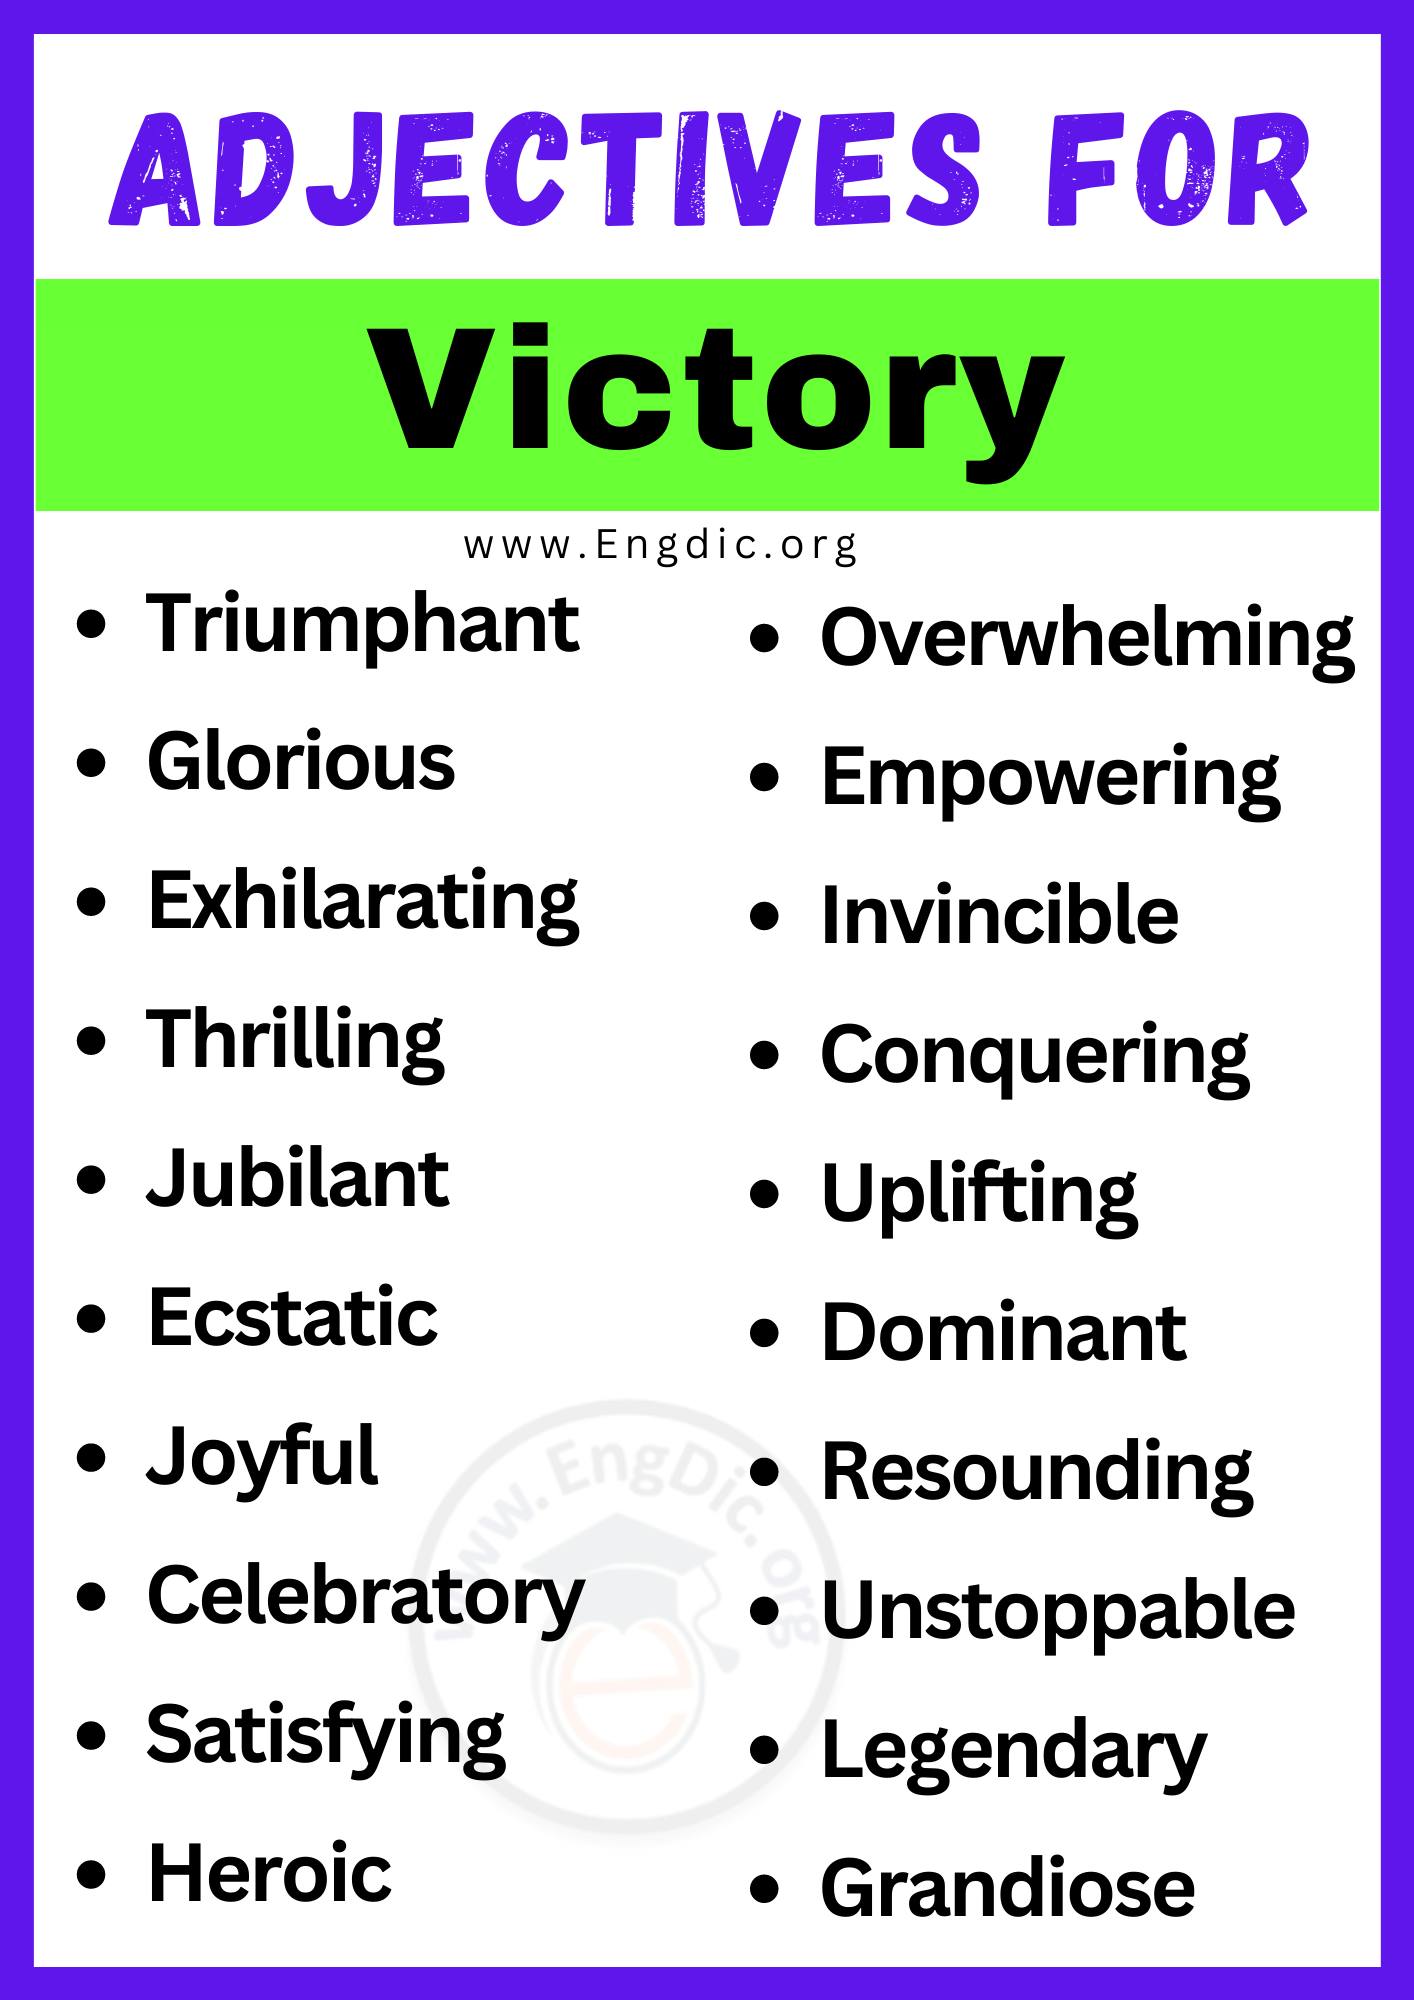 Adjectives for Victory